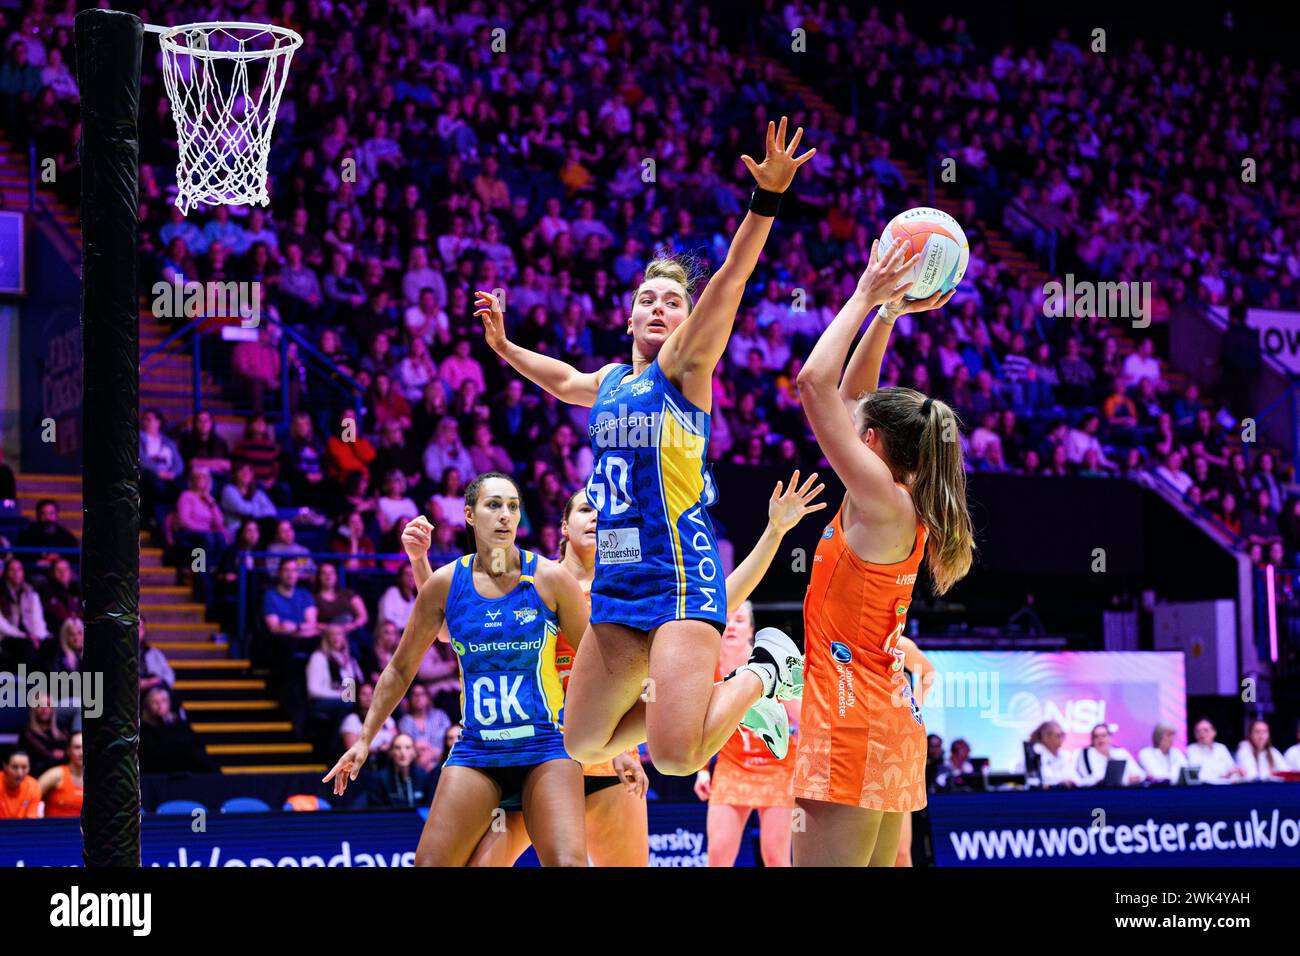 NOTTINGHAM, UNITED KINGDOM. Feb 17, 24. Michelle Magee (centre) in action during todays match of Severn Stars v Leeds Rhinos during Netball Super League Season Opener 2024 at Motorpoint Arena on Saturday, February 17, 2024, NOTTINGHAM, ENGLAND. Credit: Taka G Wu/Alamy Live News Stock Photo